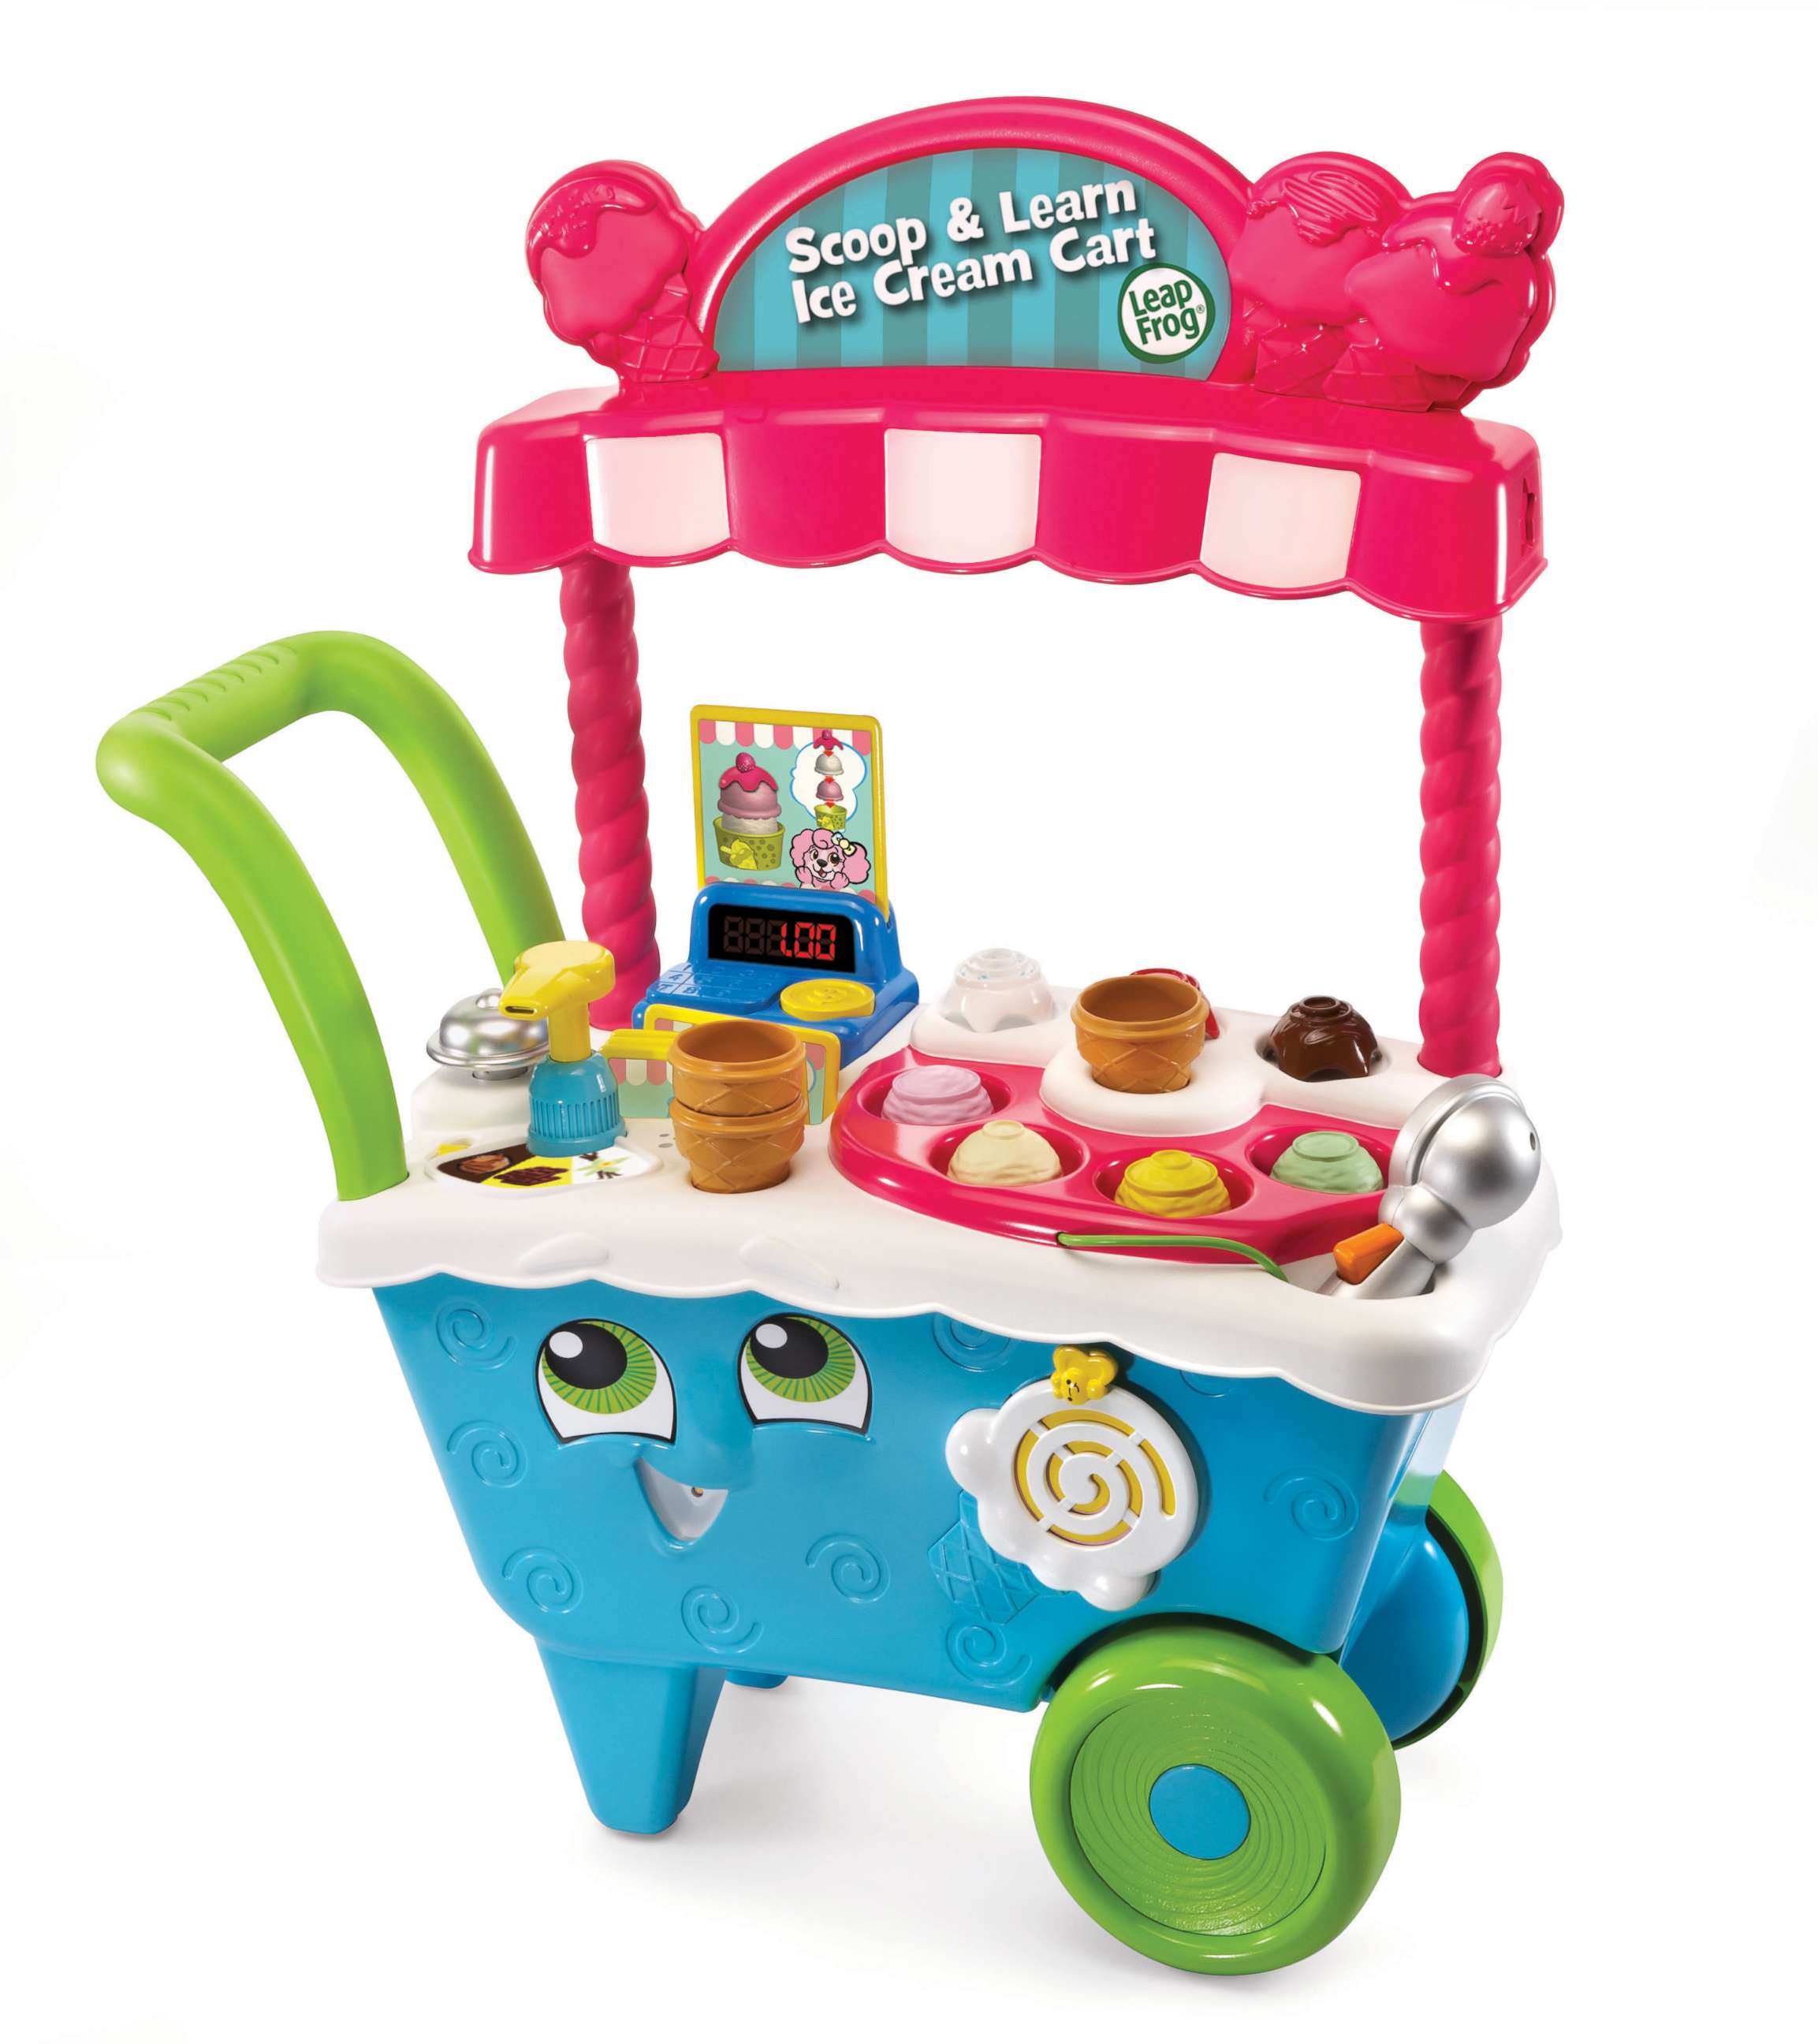 PHOTO: LeapFrog Scoop & Learn Ice Cream Cart has been named one of Good Housekeeping's Hottest Toys under $50.